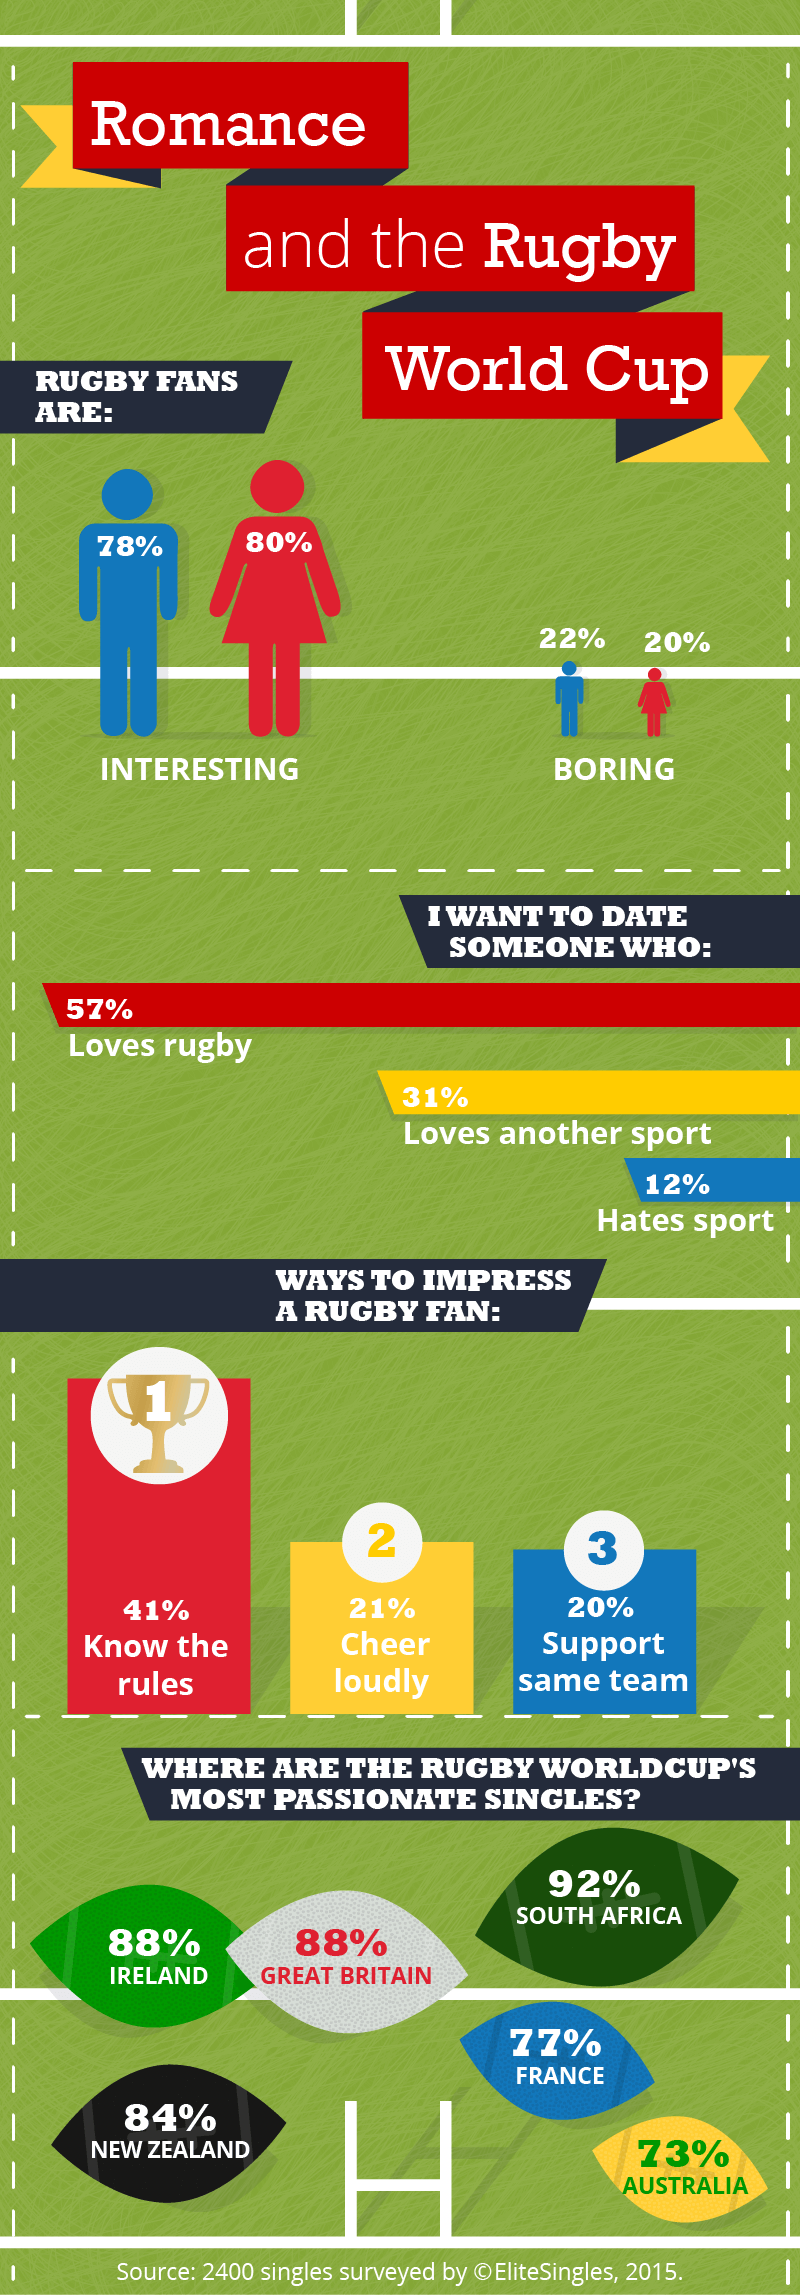 infographic showing different stats about romance and the rugby world cup